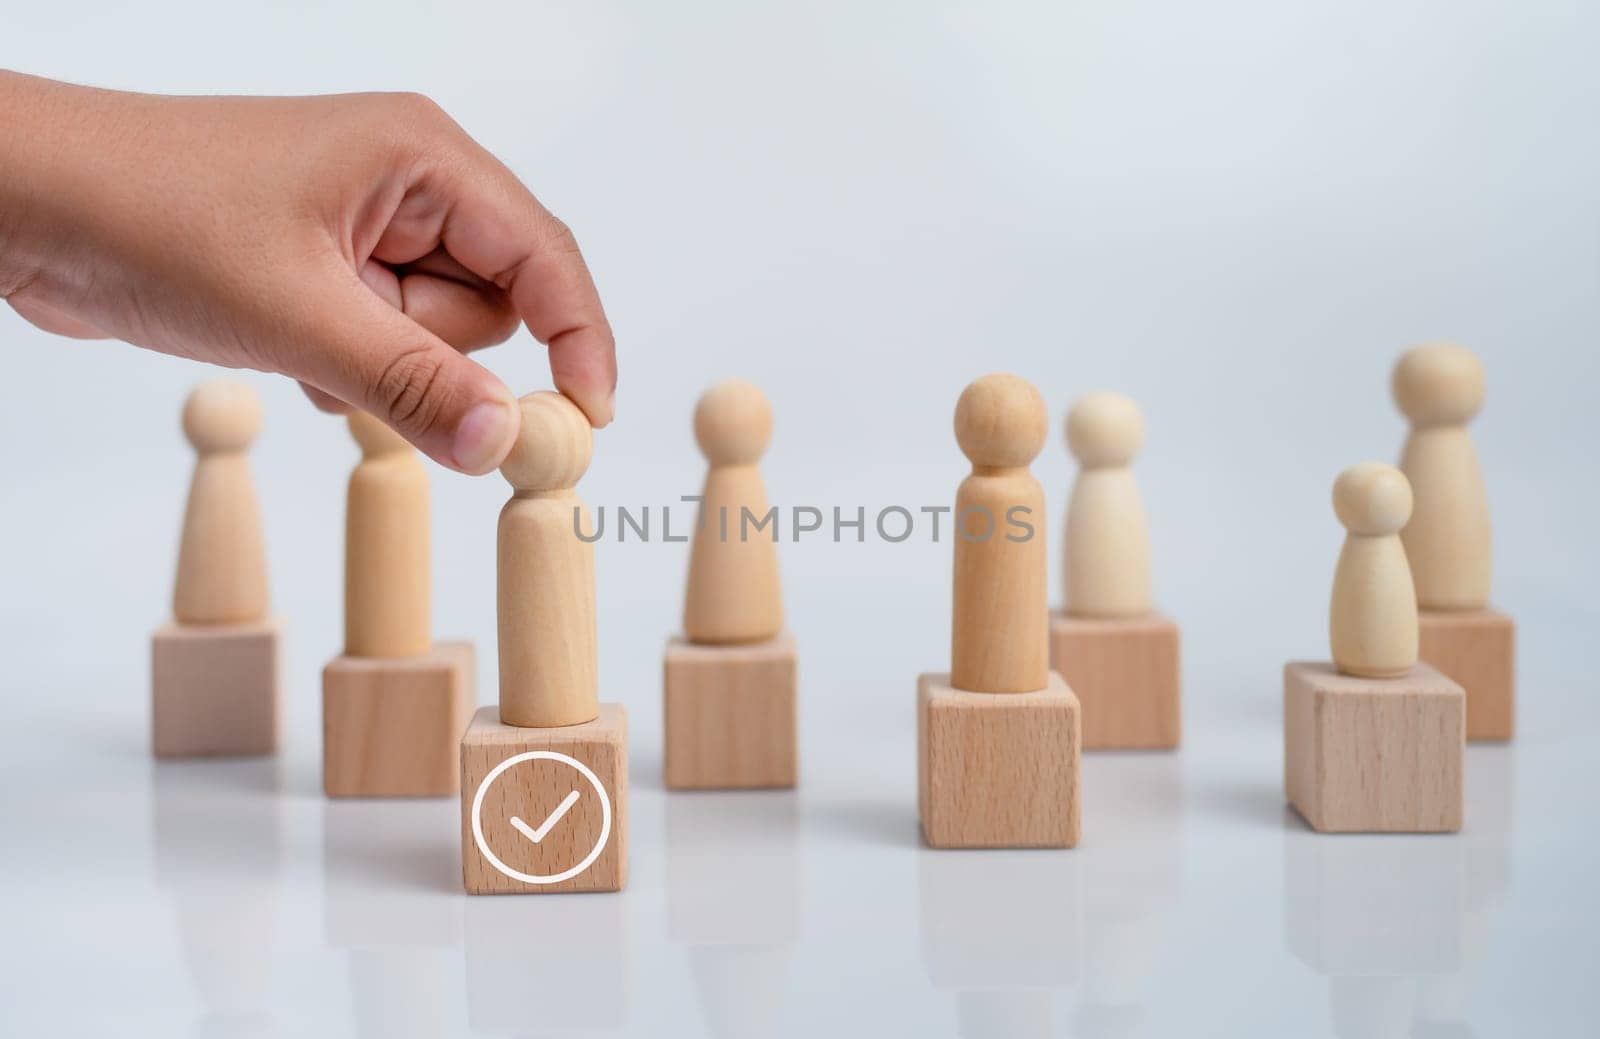 concept Business and HR for leadership and team leader, one wooden dolls stand out in front  Different and stand out from the group by Unimages2527